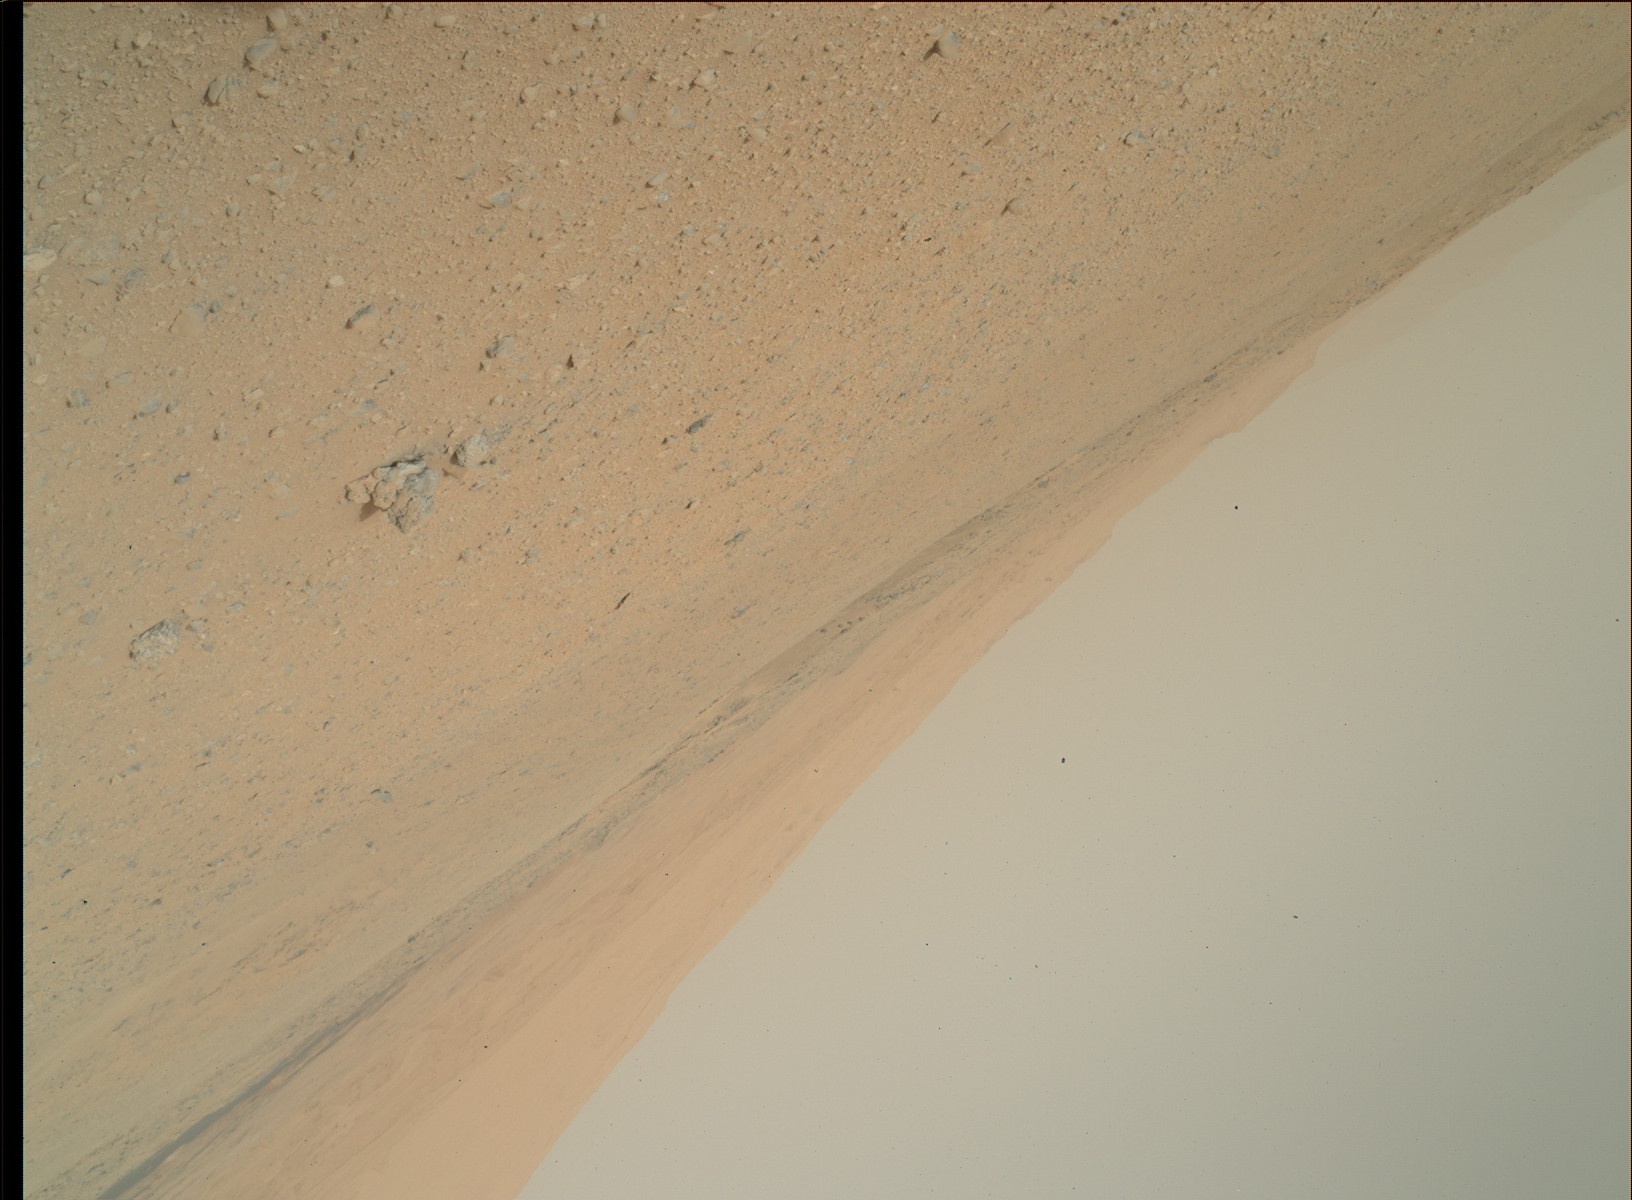 Nasa's Mars rover Curiosity acquired this image using its Mars Hand Lens Imager (MAHLI) on Sol 670